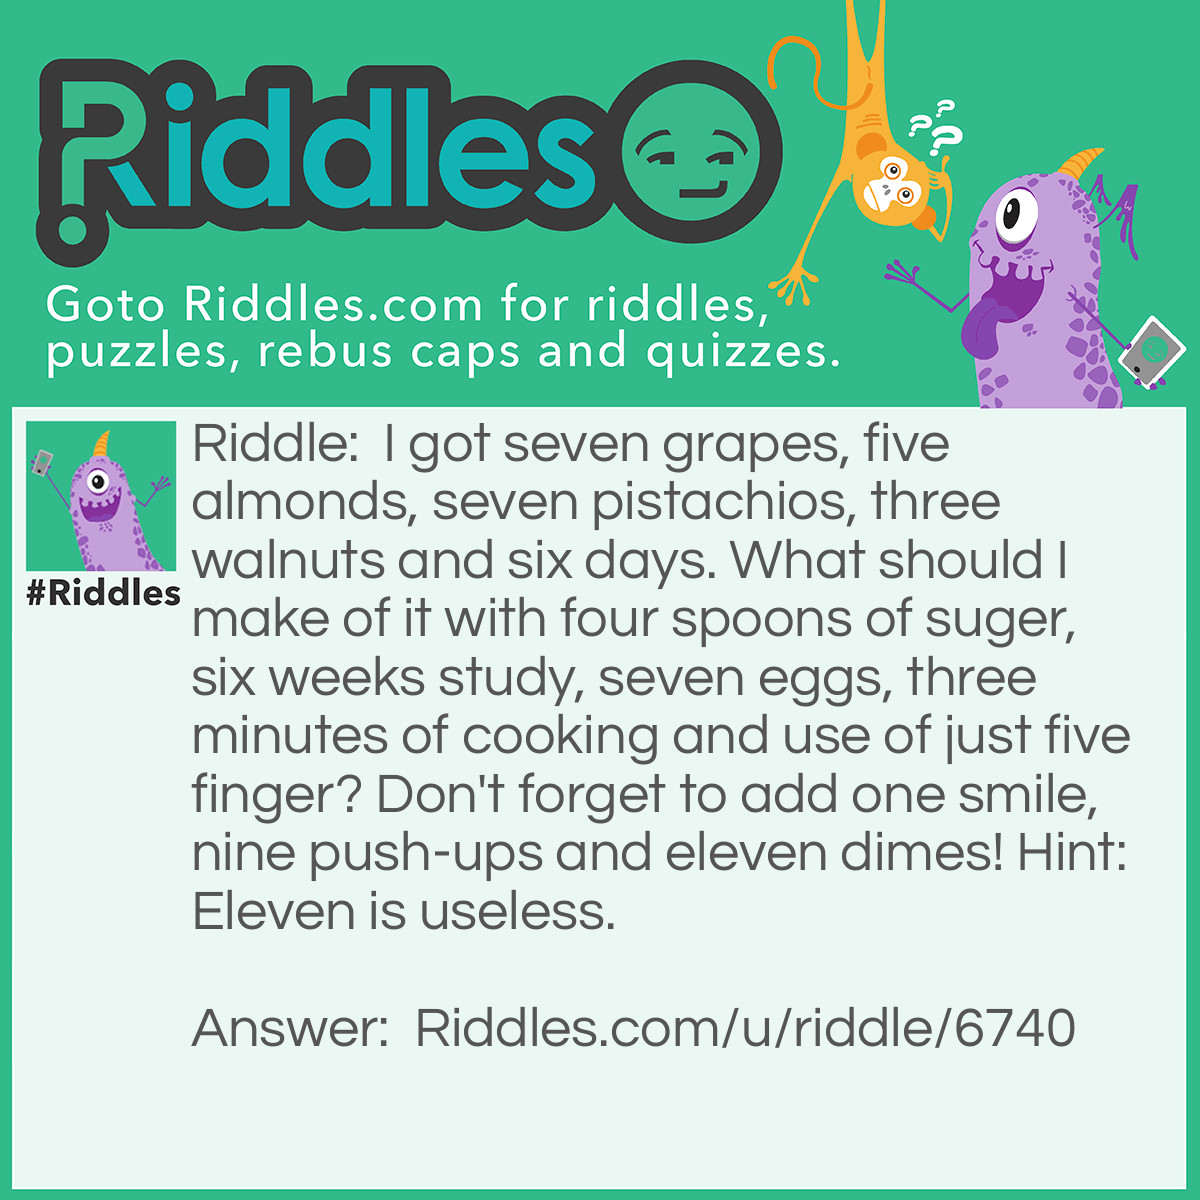 Riddle: I got seven grapes, five almons, seven pistachios, three walnuts and siz days.  What should I make of it with four spoons of sugar, six weeks study, seven eggs, three minutes of cooking and use just one finger?  Don't forget to add one smile, none push-ups and eleven dimes! Hint: Eleven is useless.  Answer: Unsanswered.